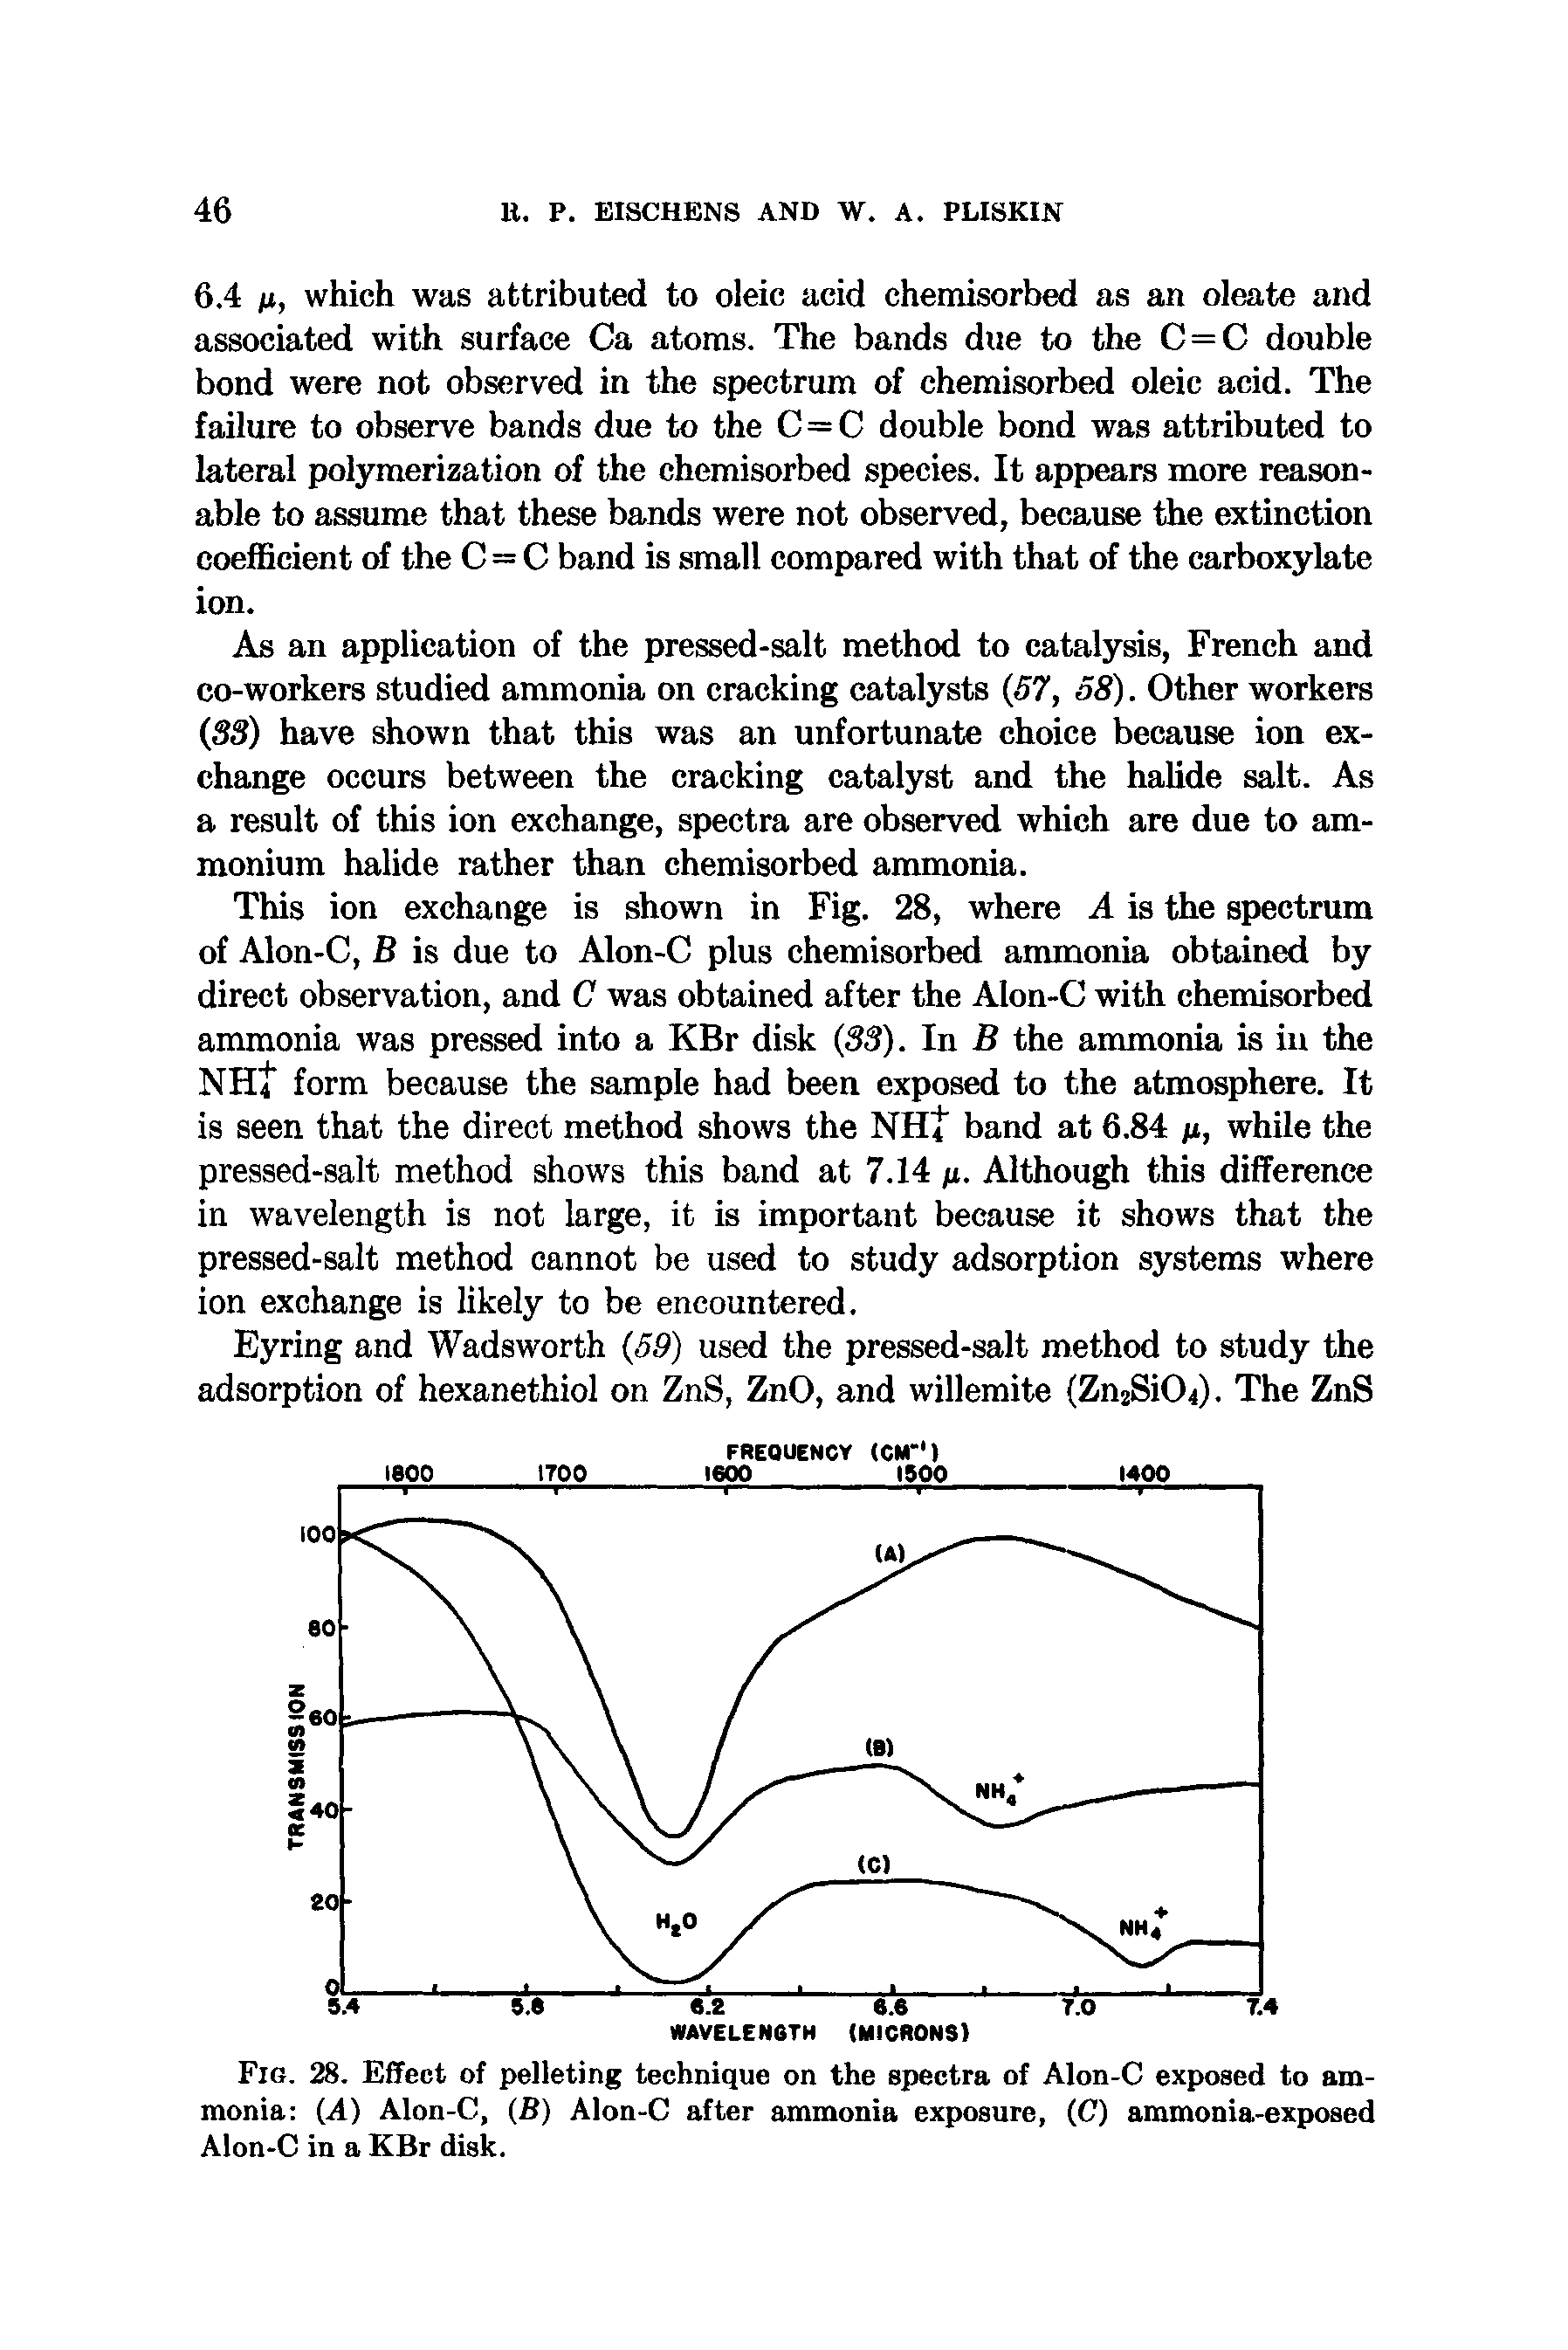 Fig. 28. Effect of pelleting technique on the spectra of Alon-C exposed to ammonia (A) Alon-C, (B) Alon-C after ammonia exposure, (C) ammonia-exposed Alon-C in a KBr disk.